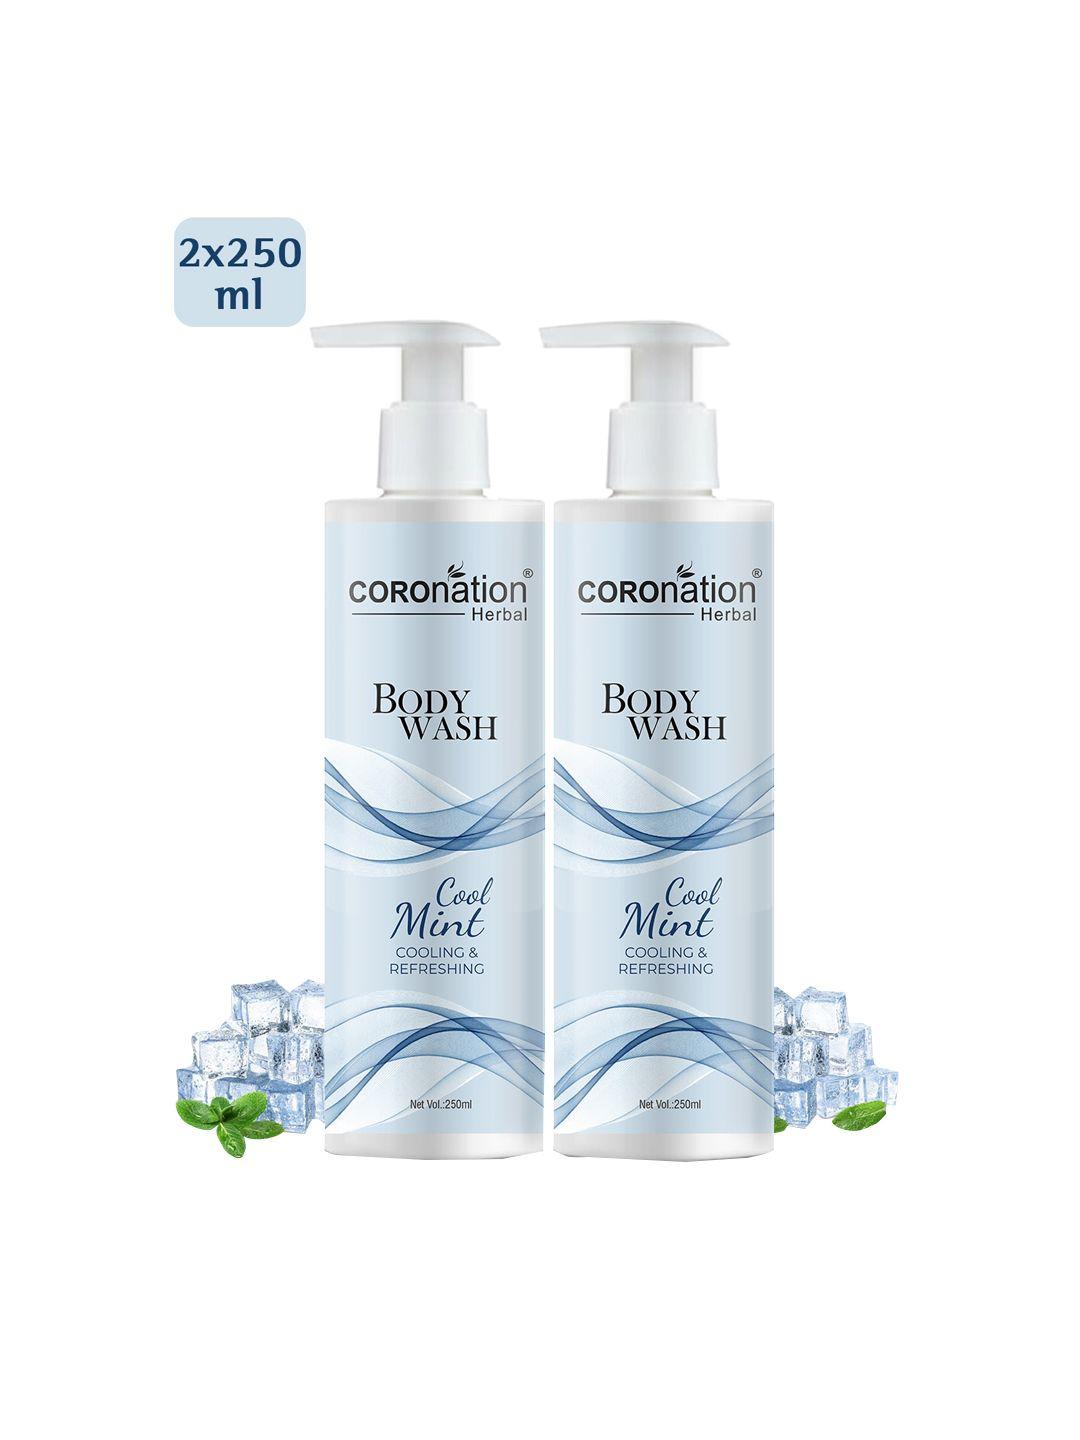 coronation herbal set of 2 cool mint body washes-250ml each